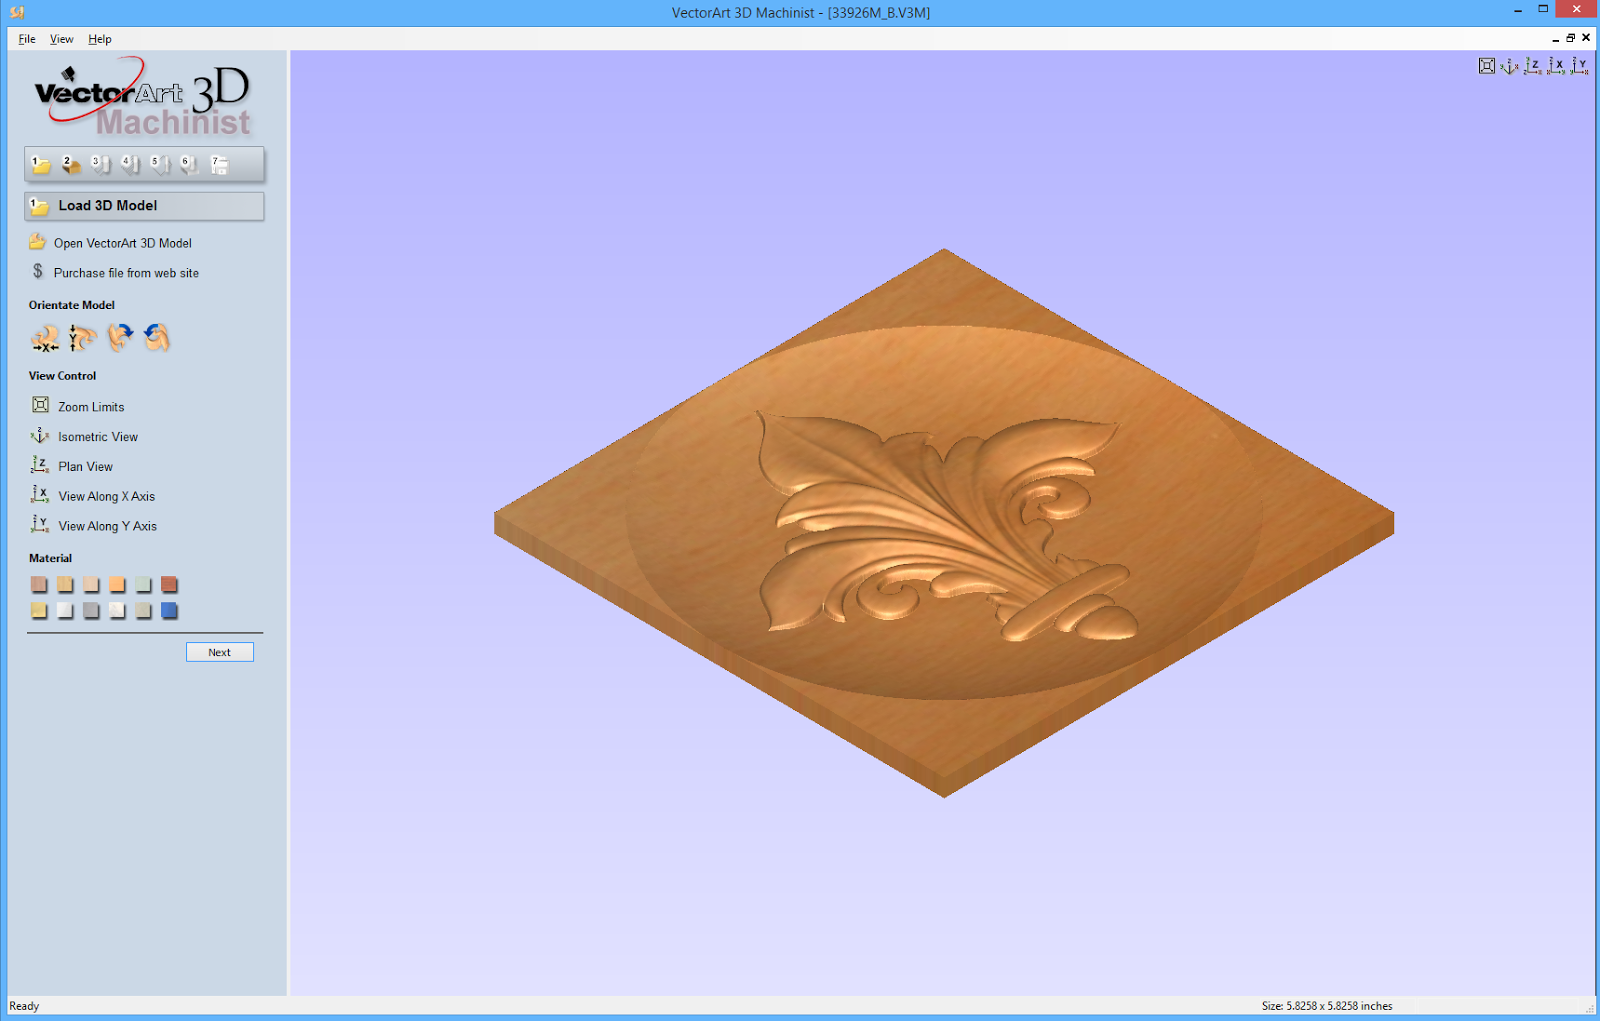 Download The Tinkers Workshop: Detailed CNC Test Part Using Free VectorArt3D Software